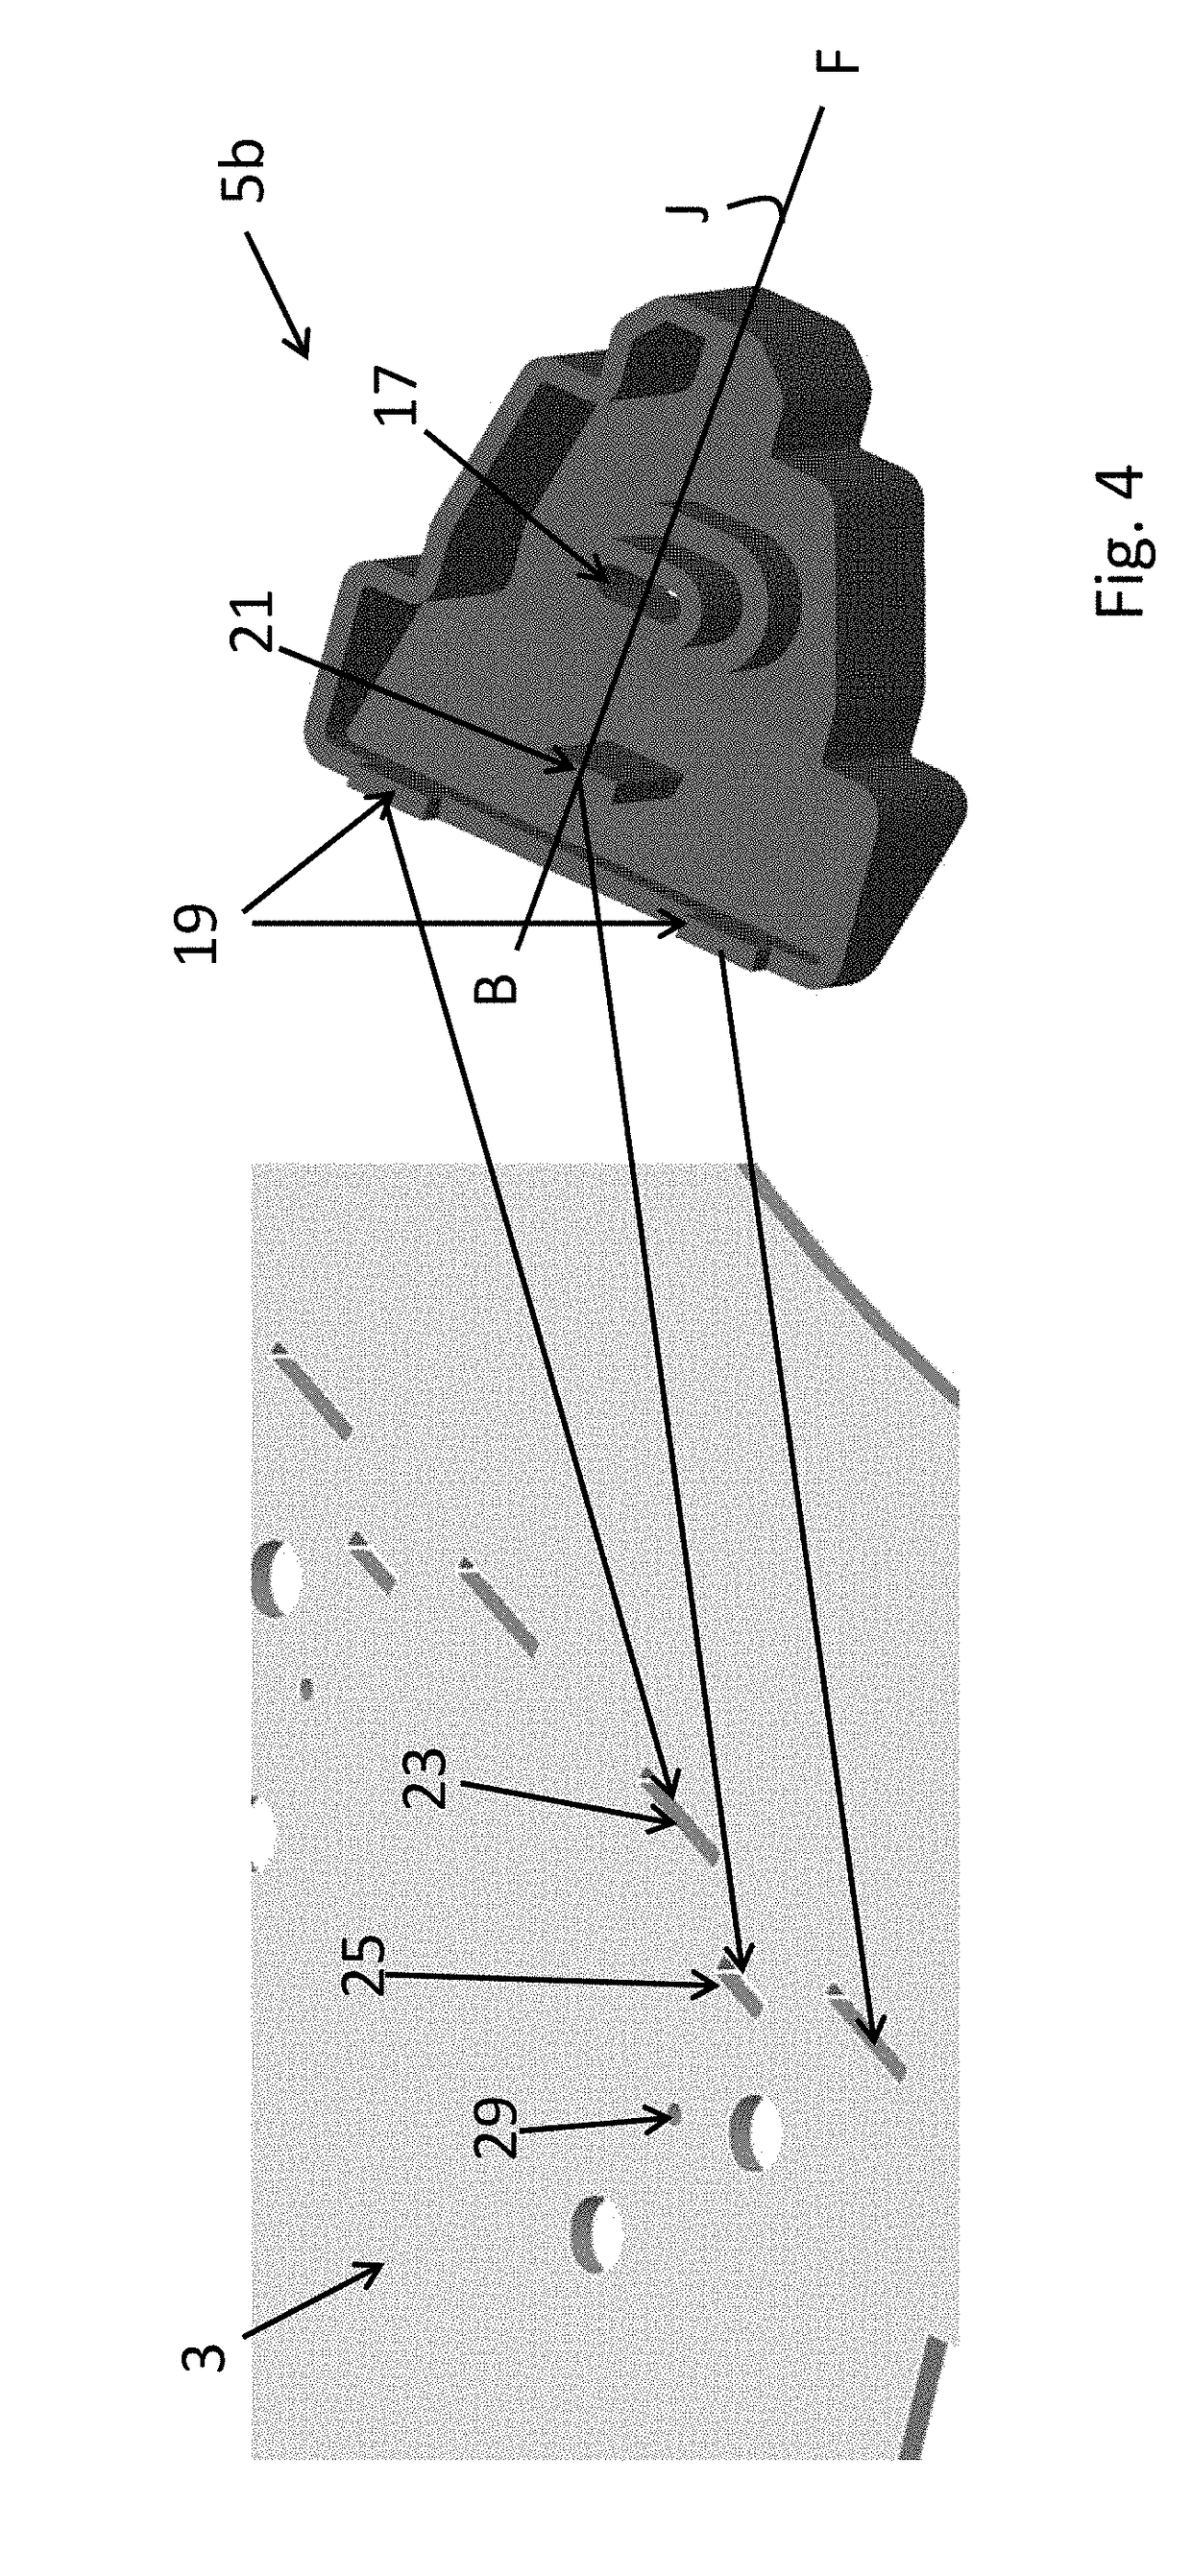 Cassette holder assembly for a substrate cassette and holding member for use in such assembly